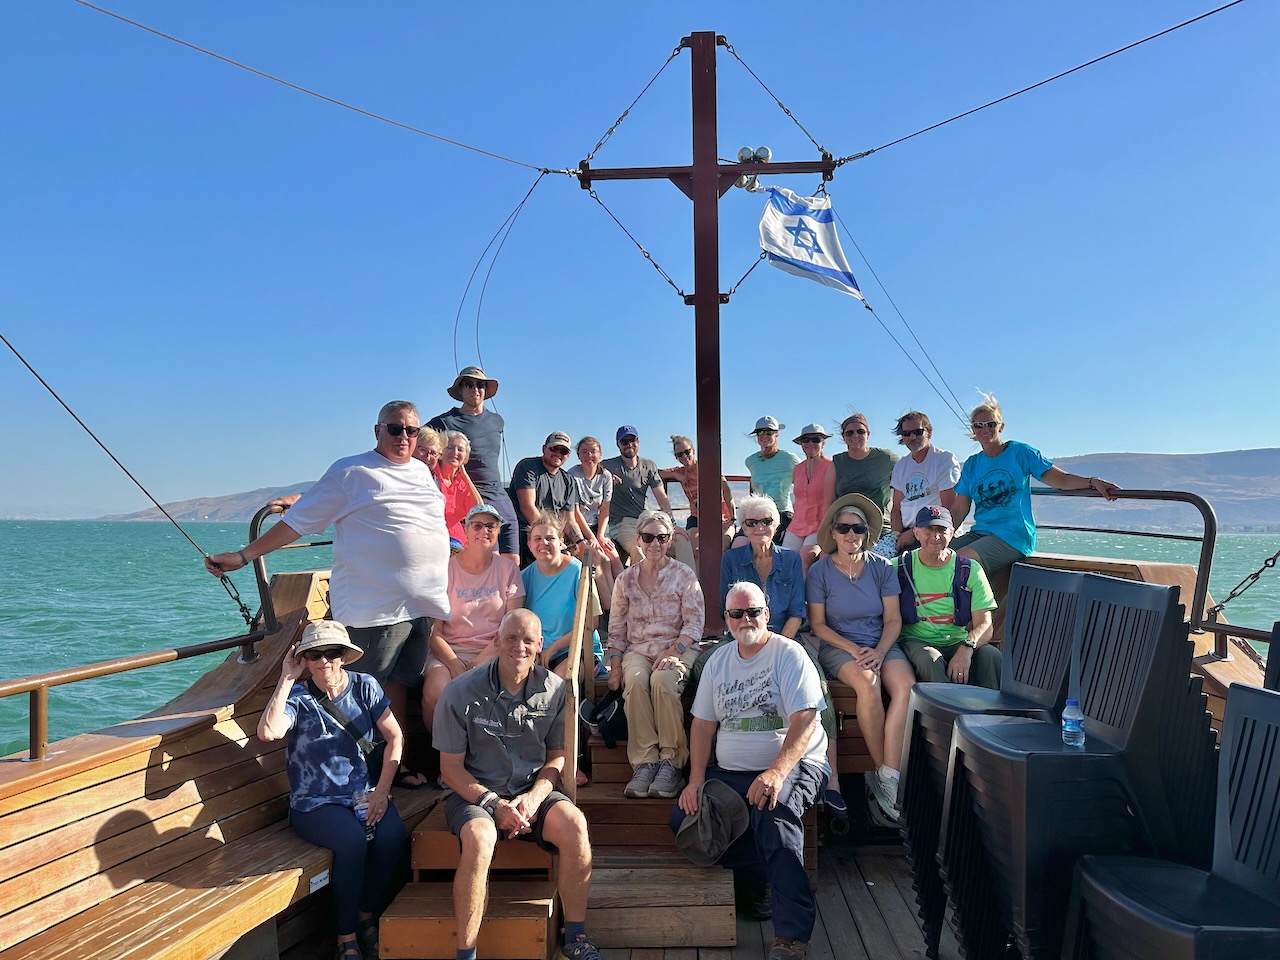 Sea of Galilee Boat Ride  Group Aug 23 Israel Tour John DeLancey